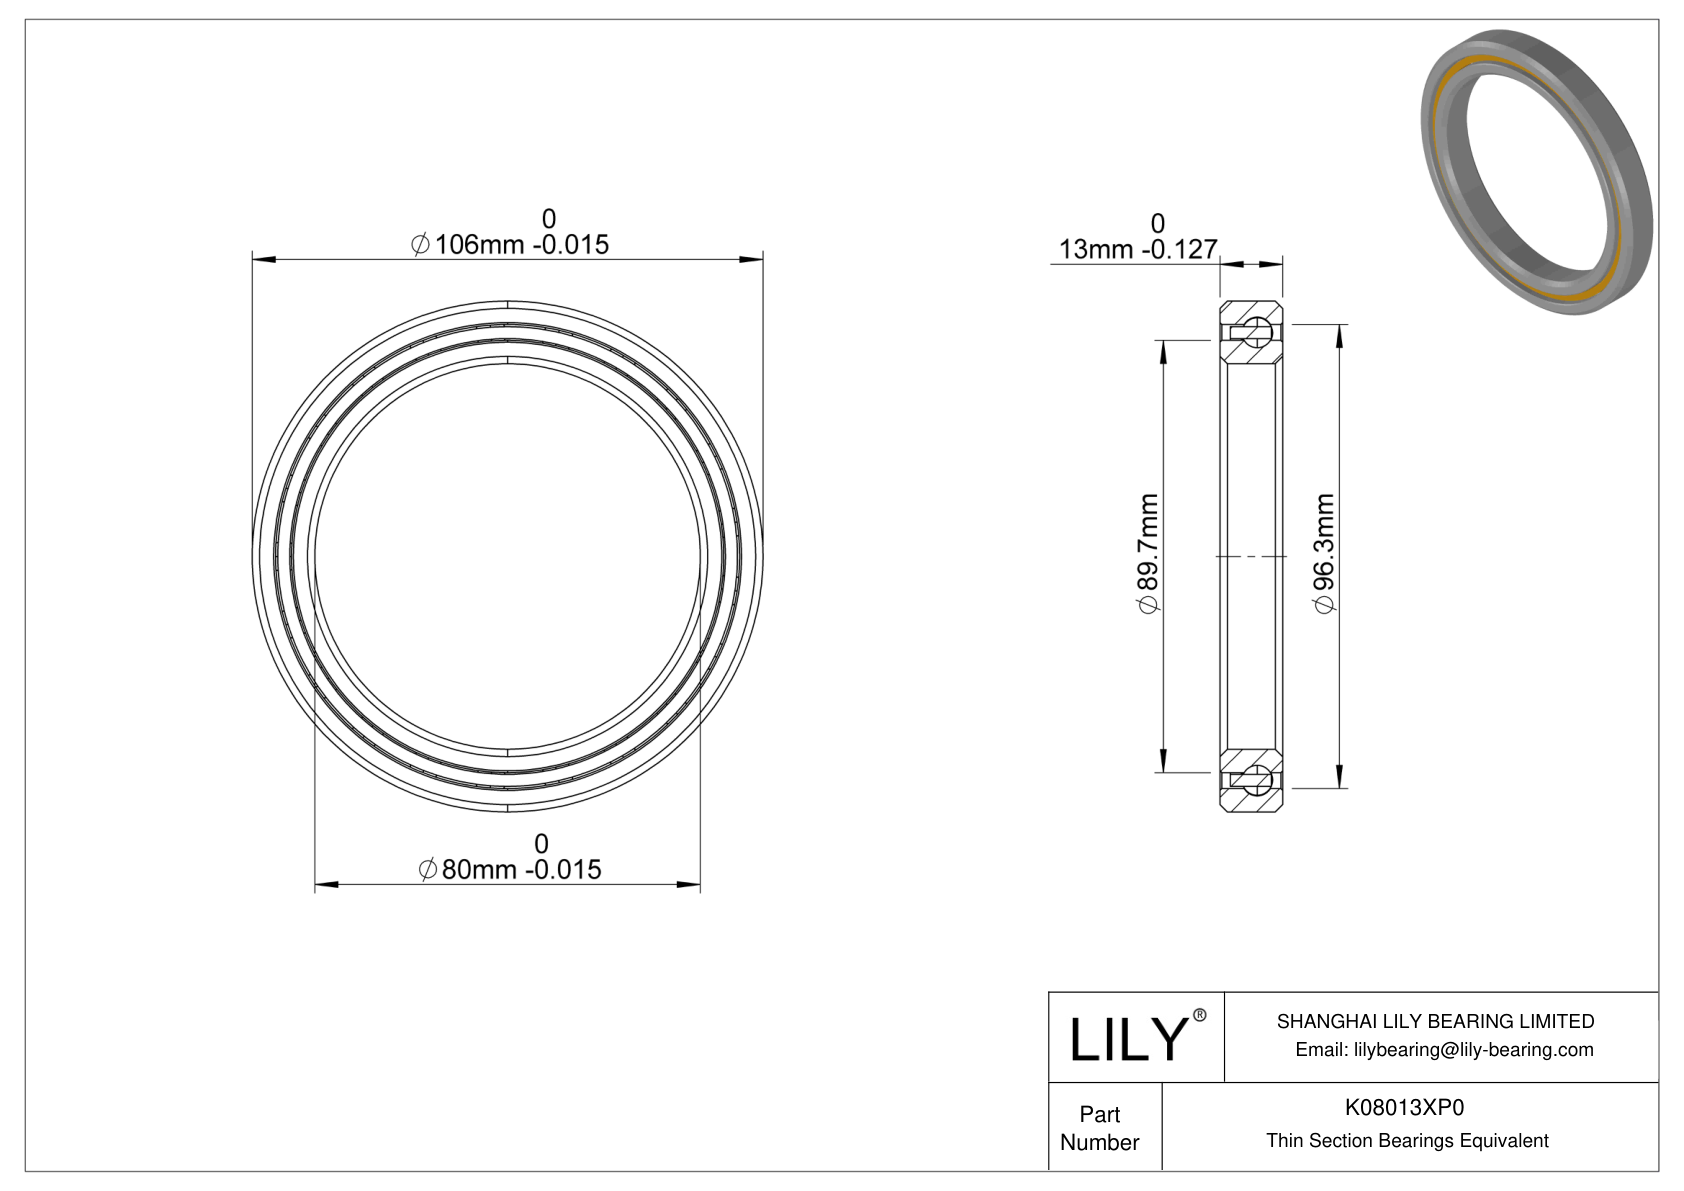 K08013XP0 Constant Section (CS) Bearings cad drawing